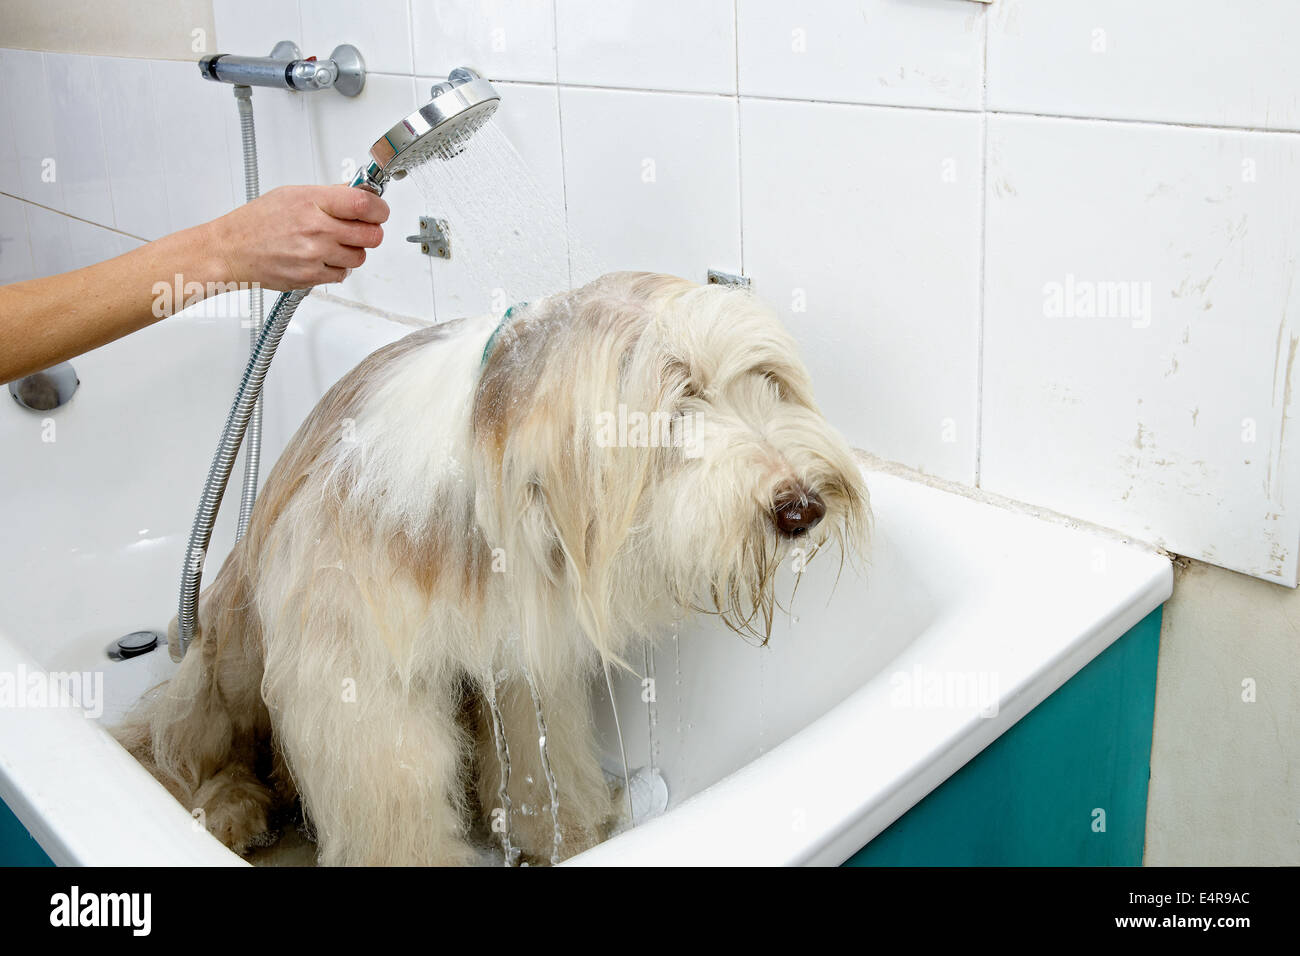 Sequence of bathing the dog